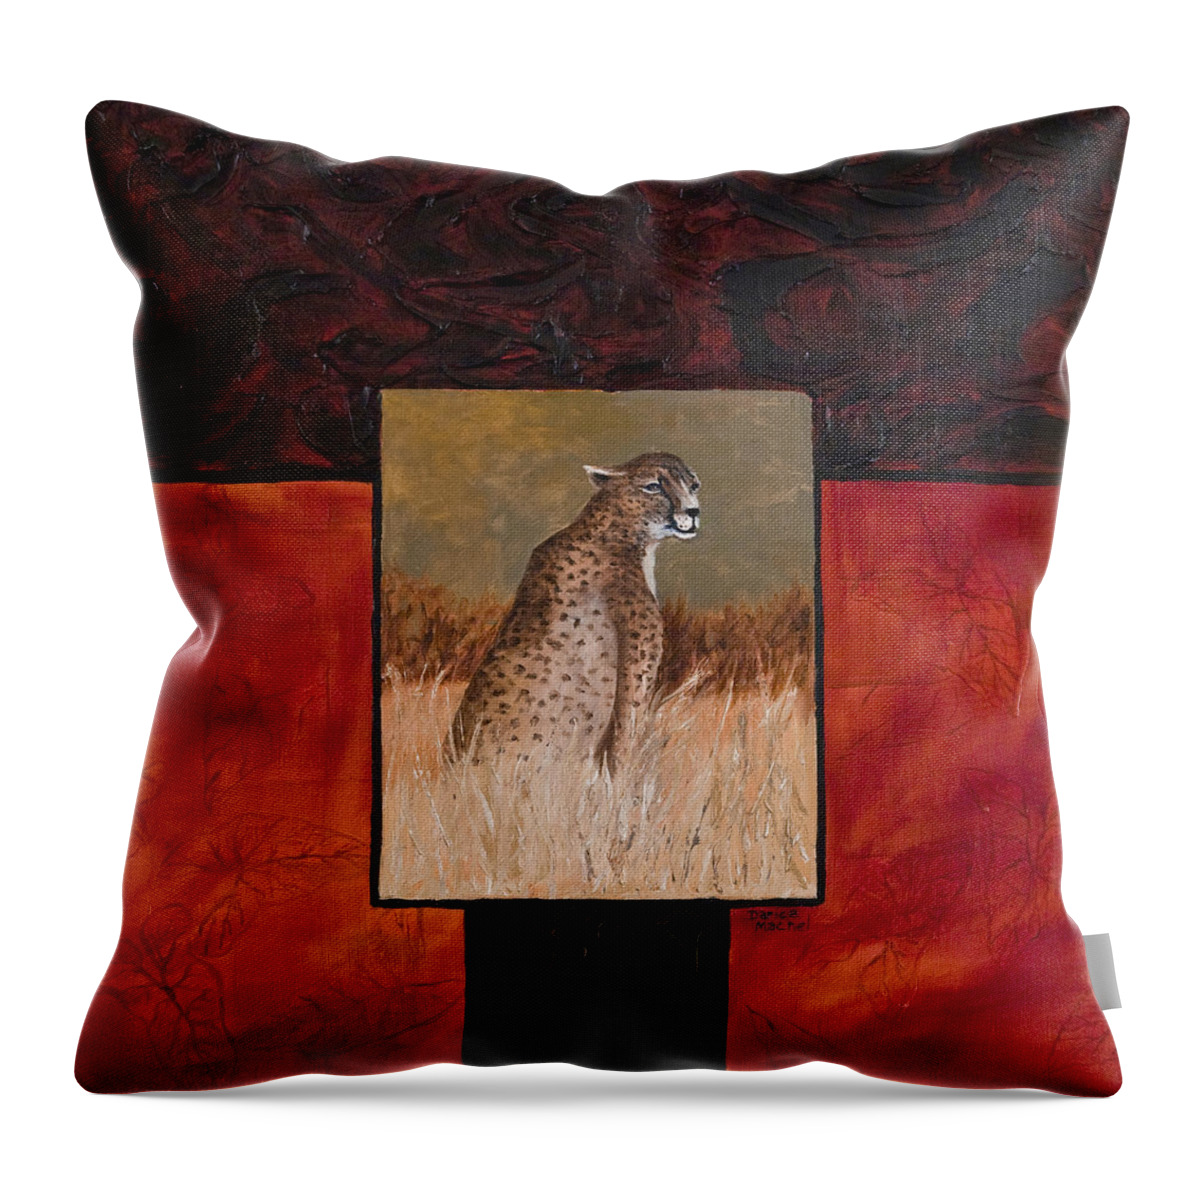 Animal Throw Pillow featuring the painting Cheetah by Darice Machel McGuire